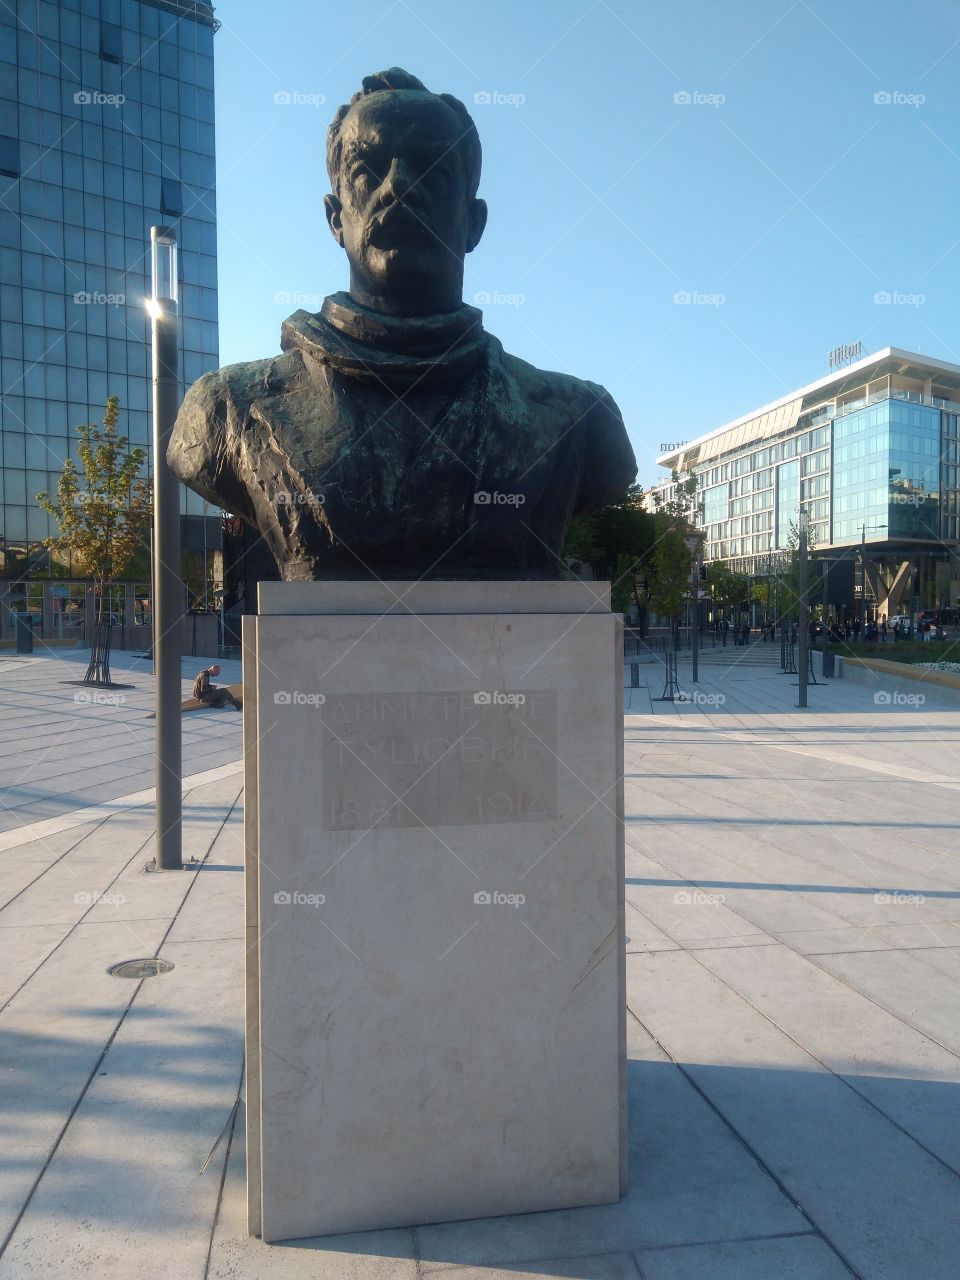 Monument to Dimitrije Tucovic in Belgrade (Serbia). He was a prominent politician and journalist